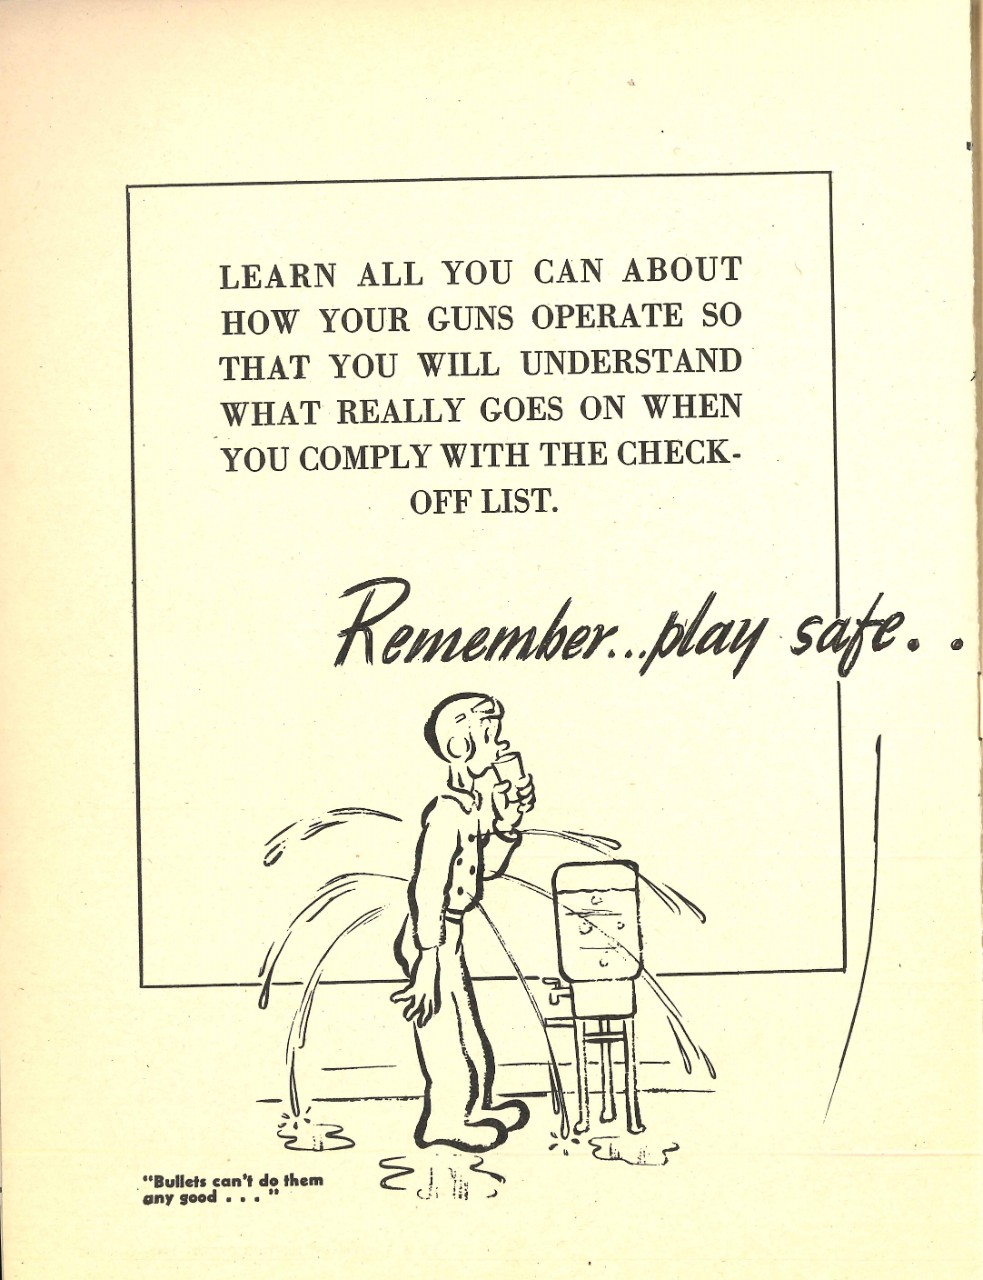 Don’t Kill Your Friends: Safety Precautions for Fixed Gunnery Page 9